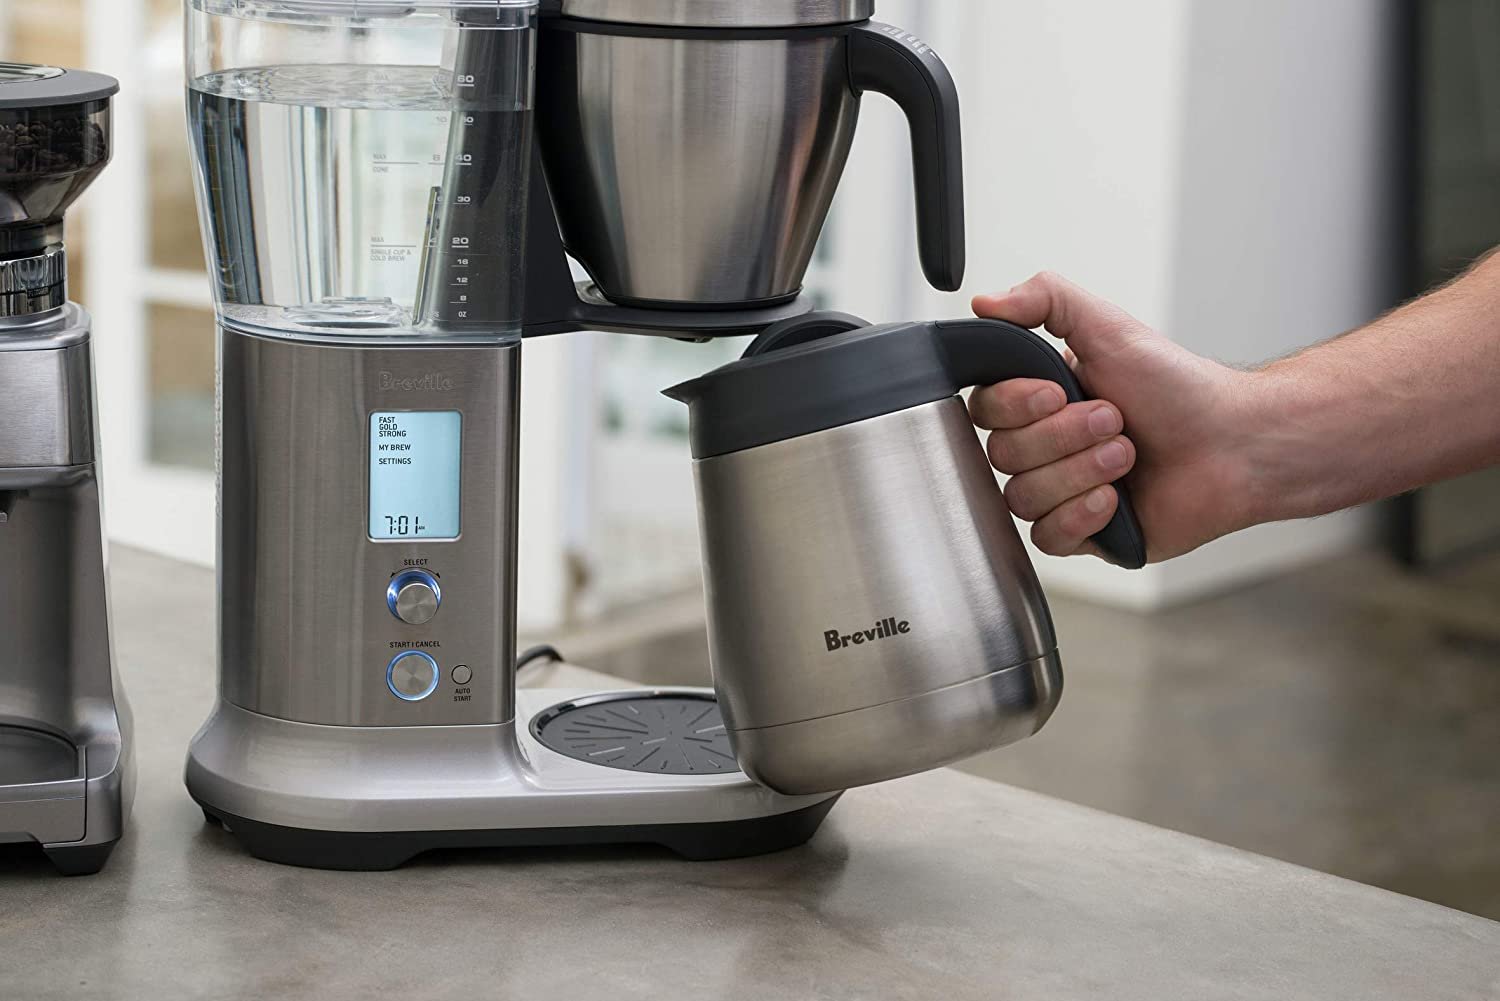 A Whopping $120 Off Puts This Stellar Breville Coffee Maker Under $300 on Amazon